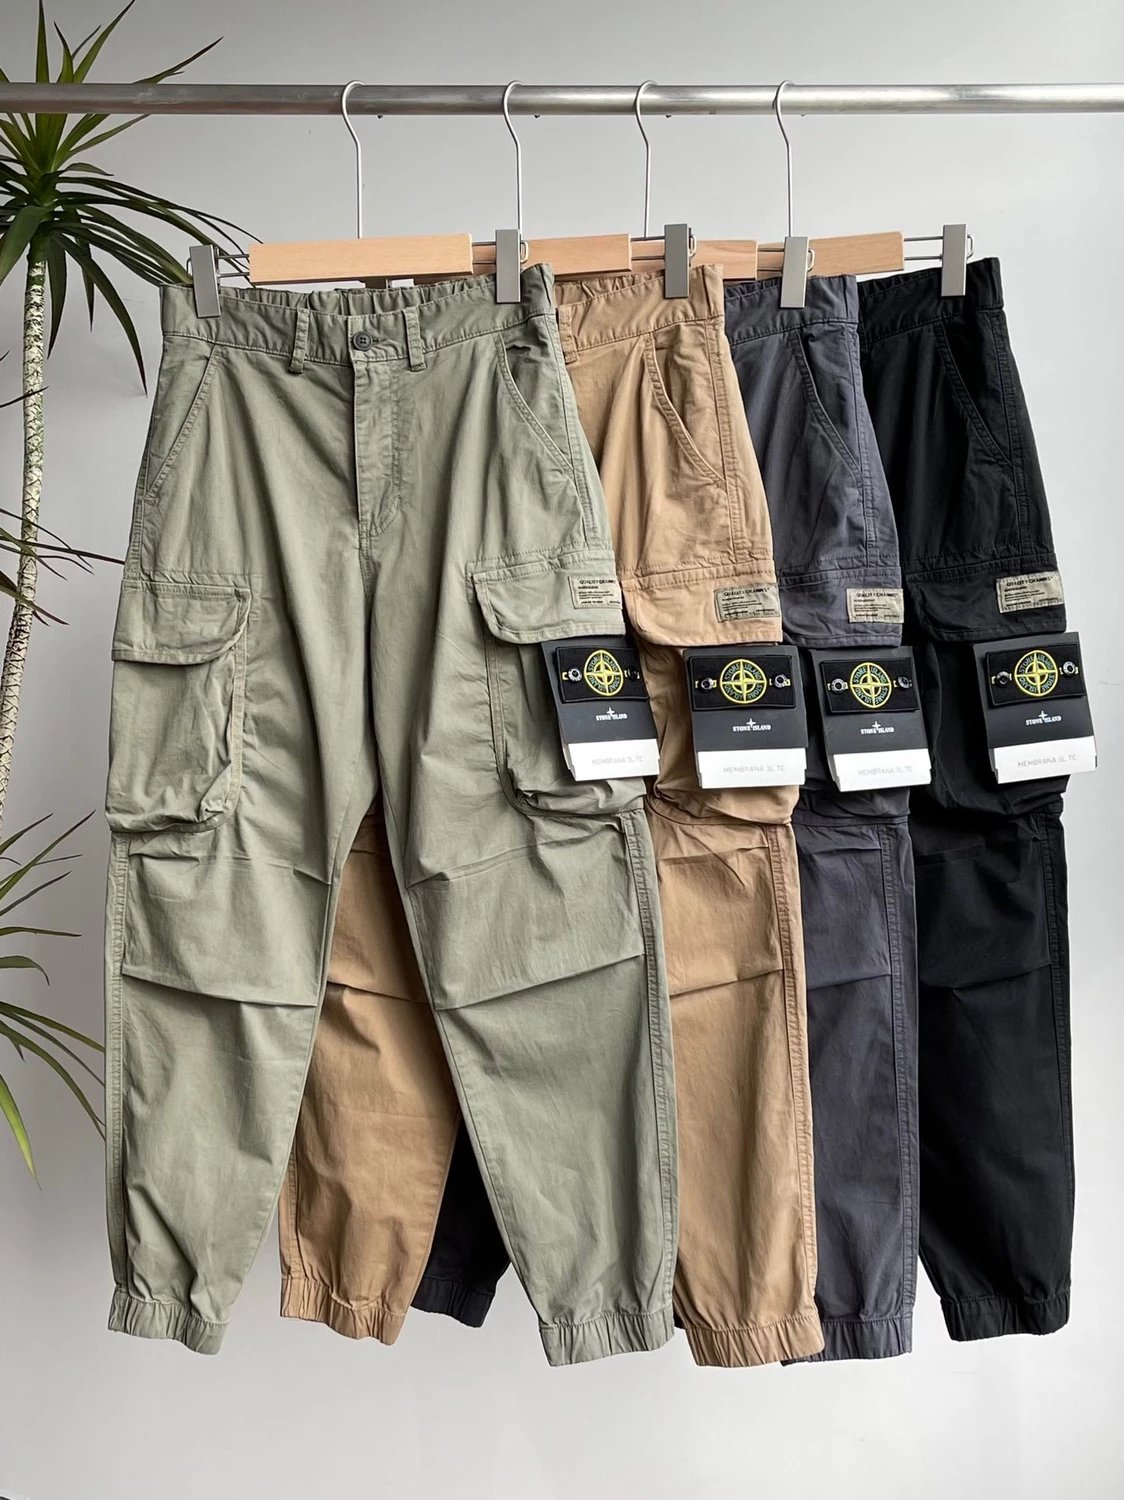 Item Thumbnail for STO stone spring/summer new military industrial style vintage wash side pocket corset foot cuff cargo pants function casual pants military pants cinched pants sweatpants black gray blue army green khaki pants ly